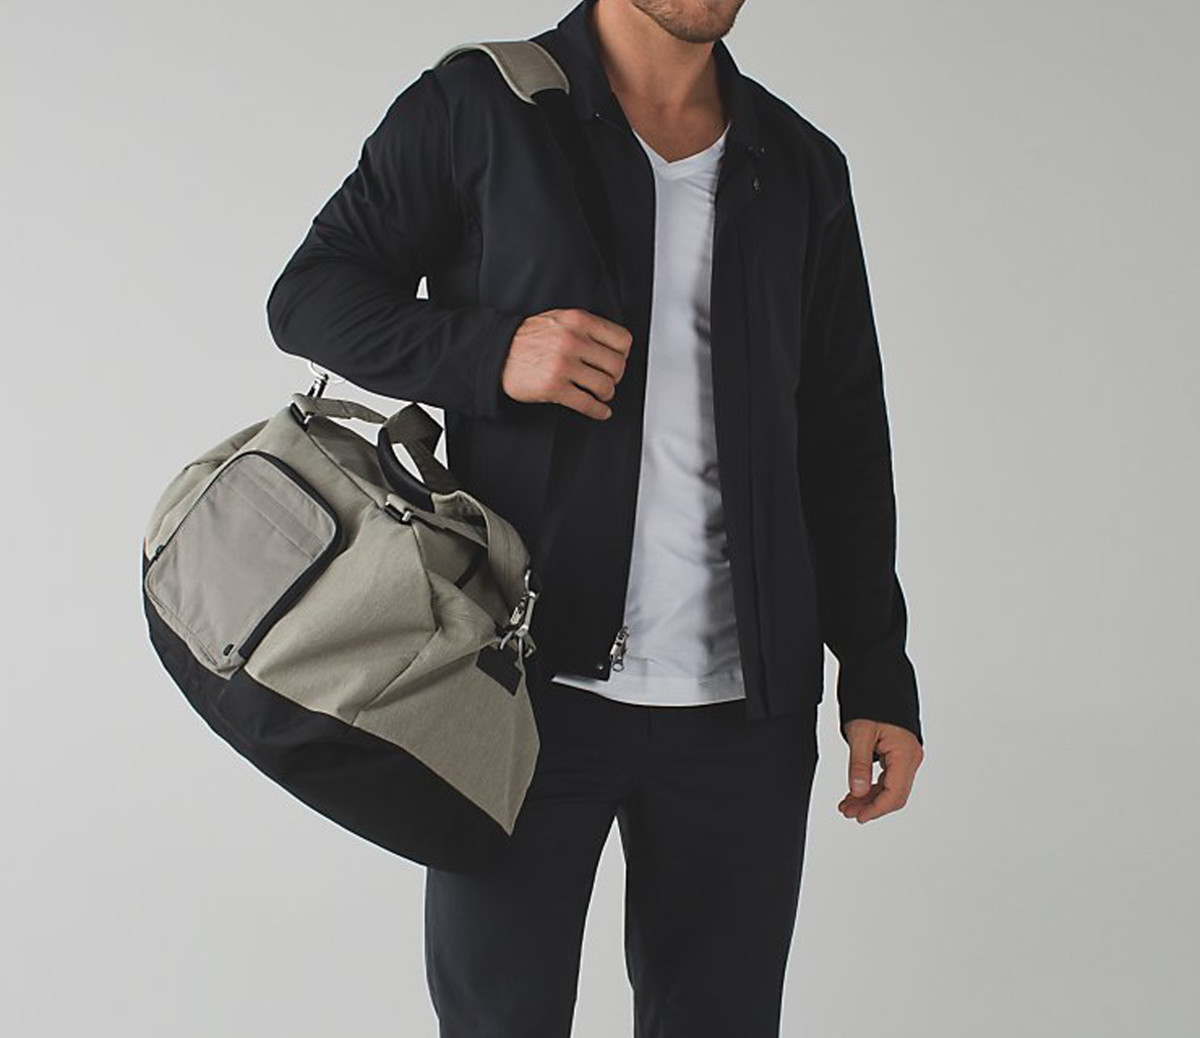 The Best Bags for Men to Transition From Work to the Gym - Men's Journal